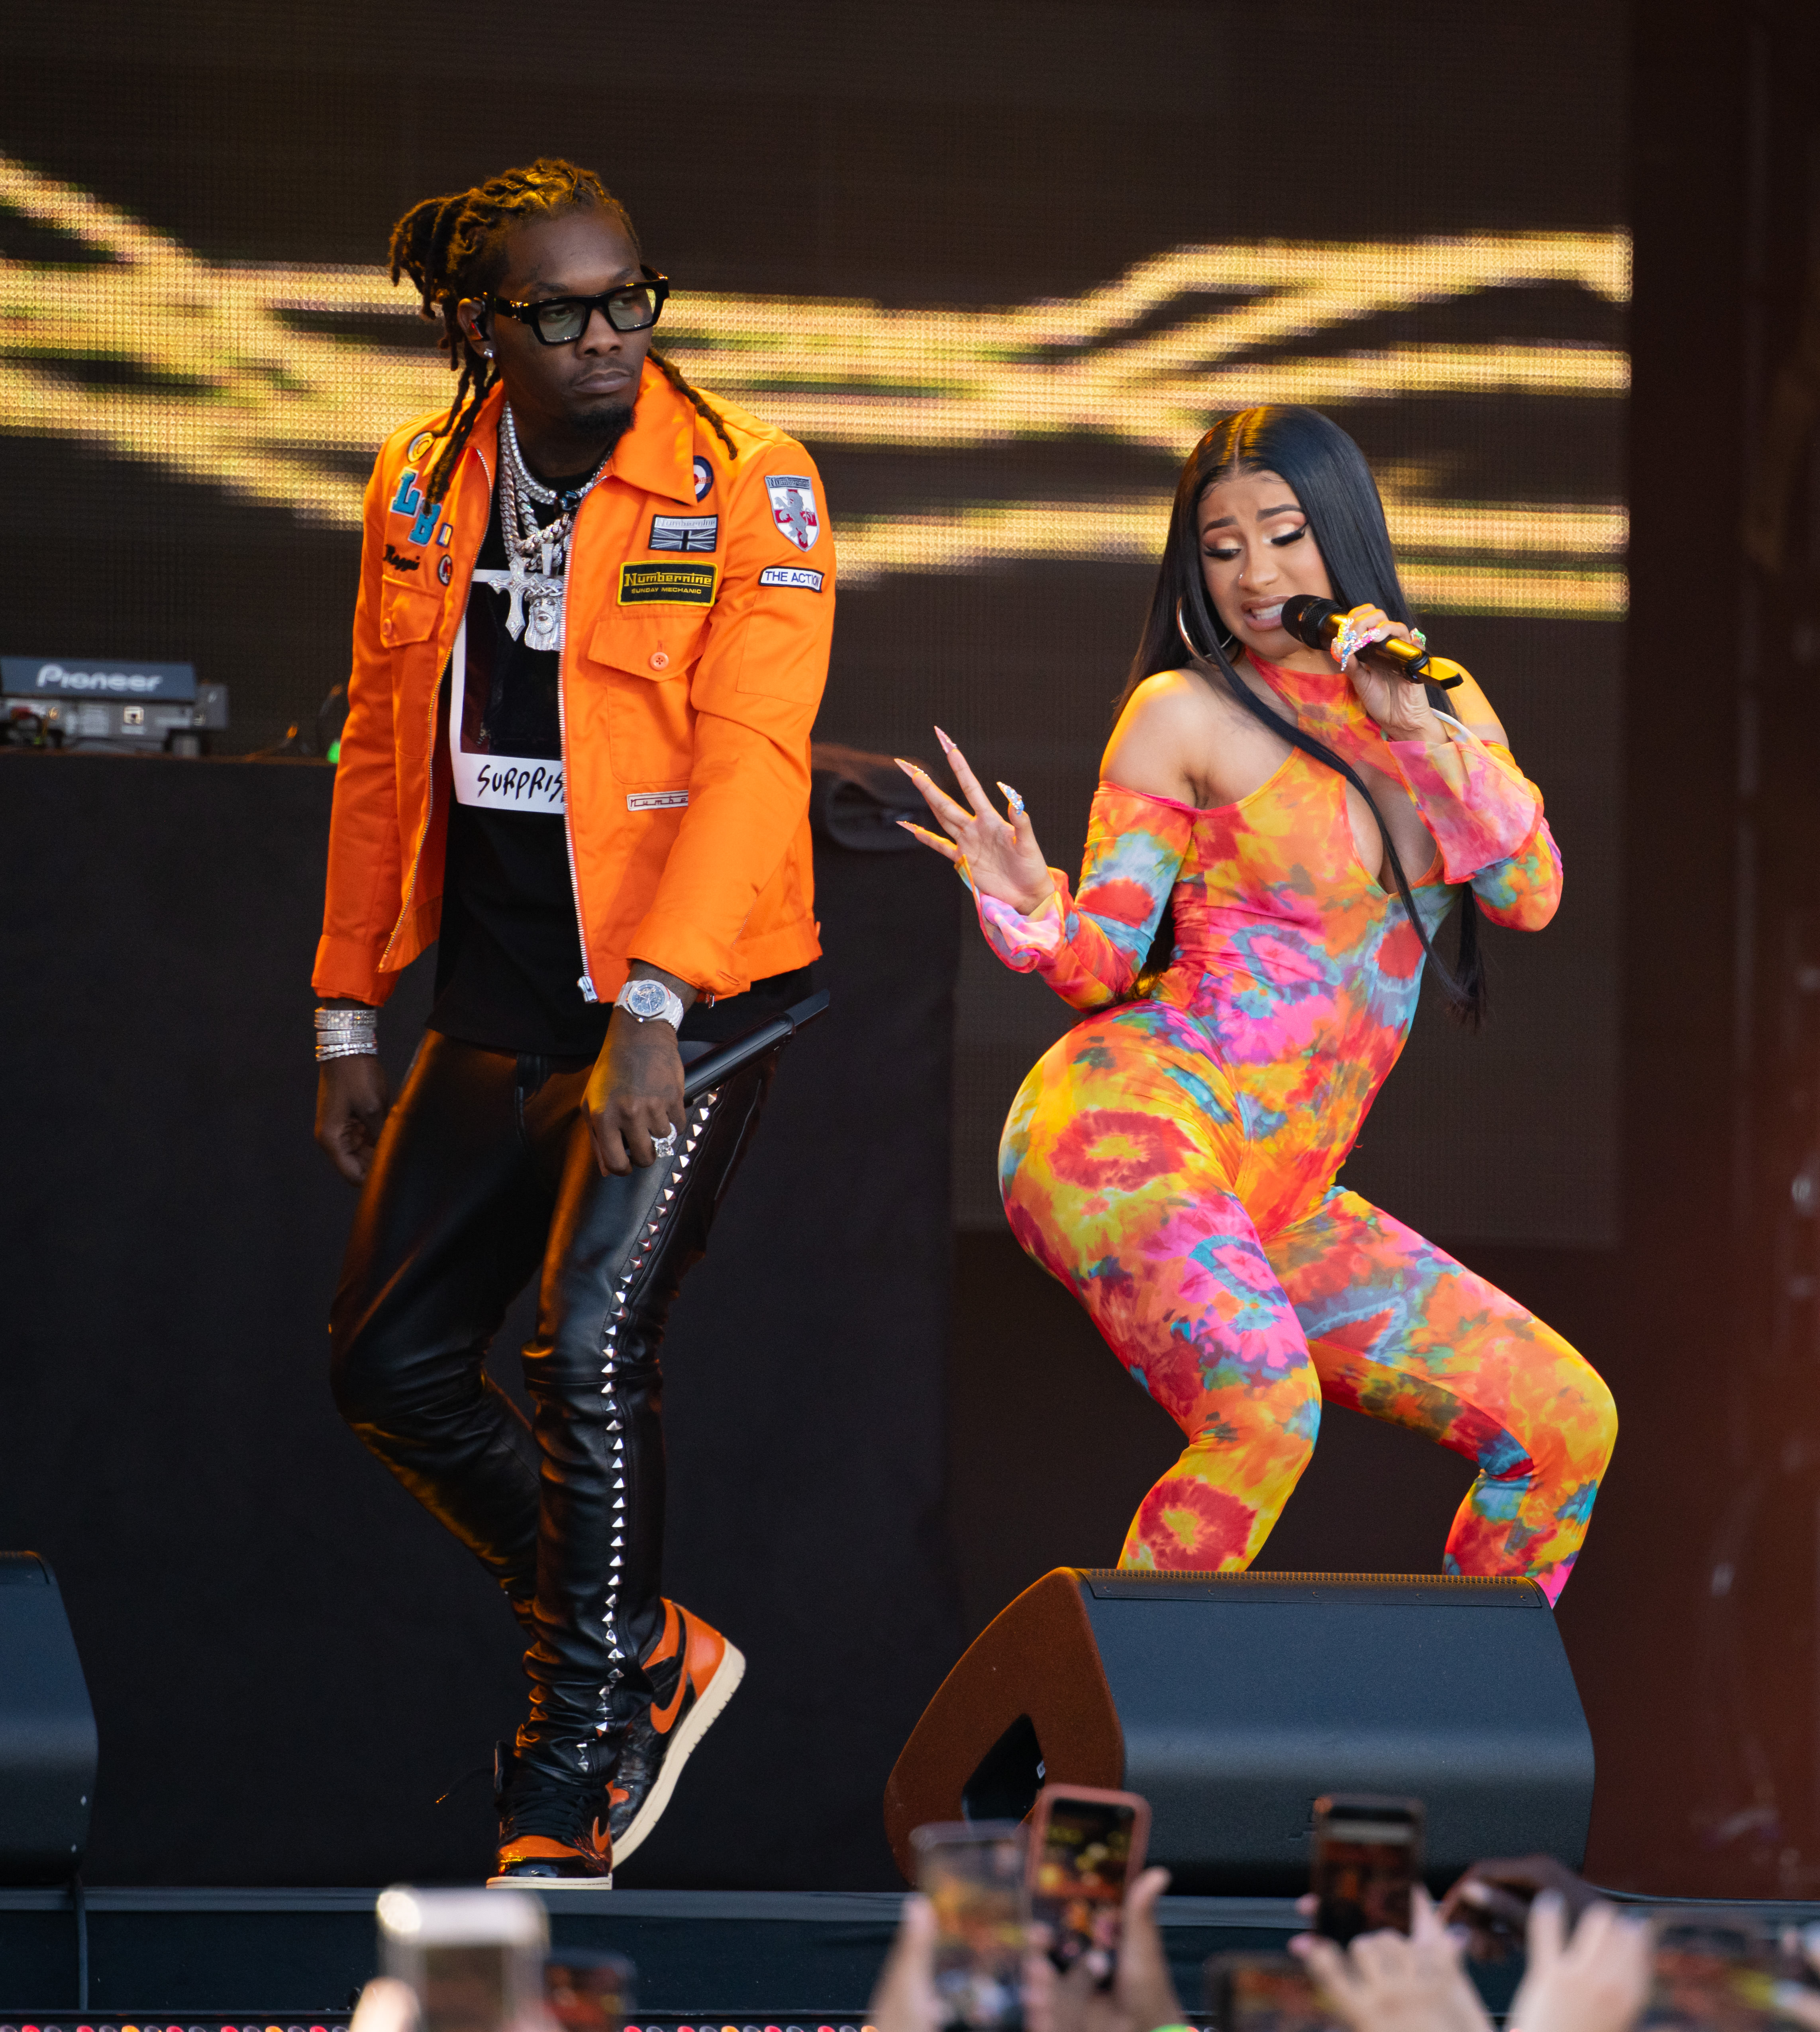 𝗛𝗼𝘂𝗿𝗹𝘆 𝗖𝗮𝗿𝗱𝗶 𝗕🍭 on X: Cardi B and Offset, 2020   / X